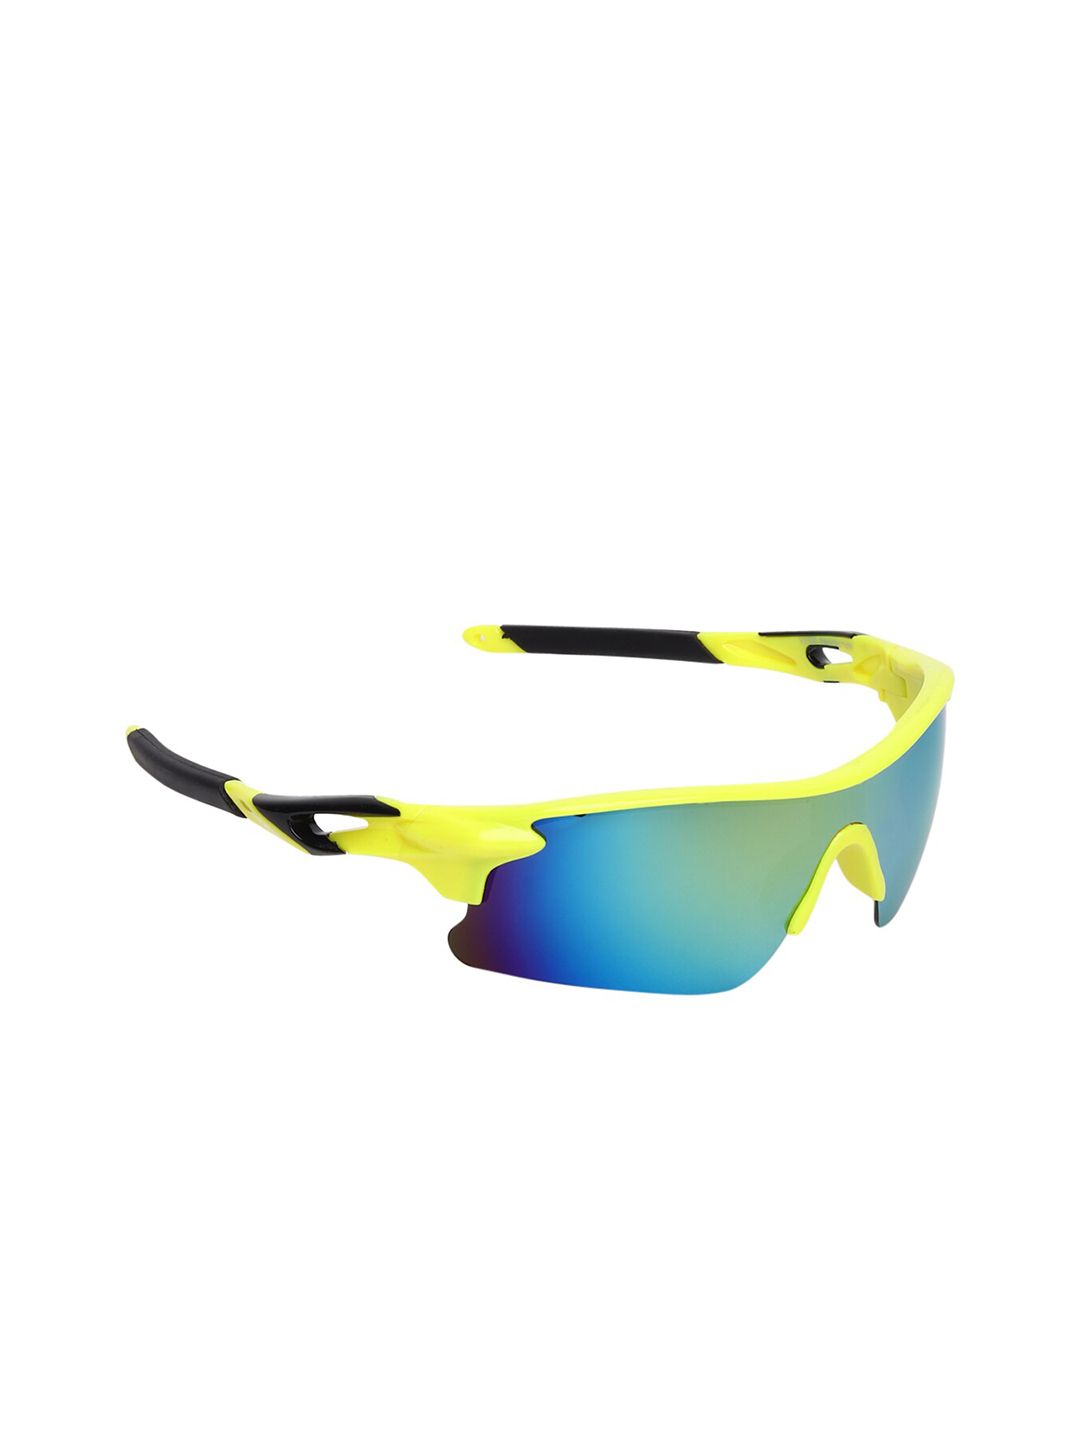 CRIBA Unisex Blue Lens & Yellow Sports Sunglasses with UV Protected Lens Price in India